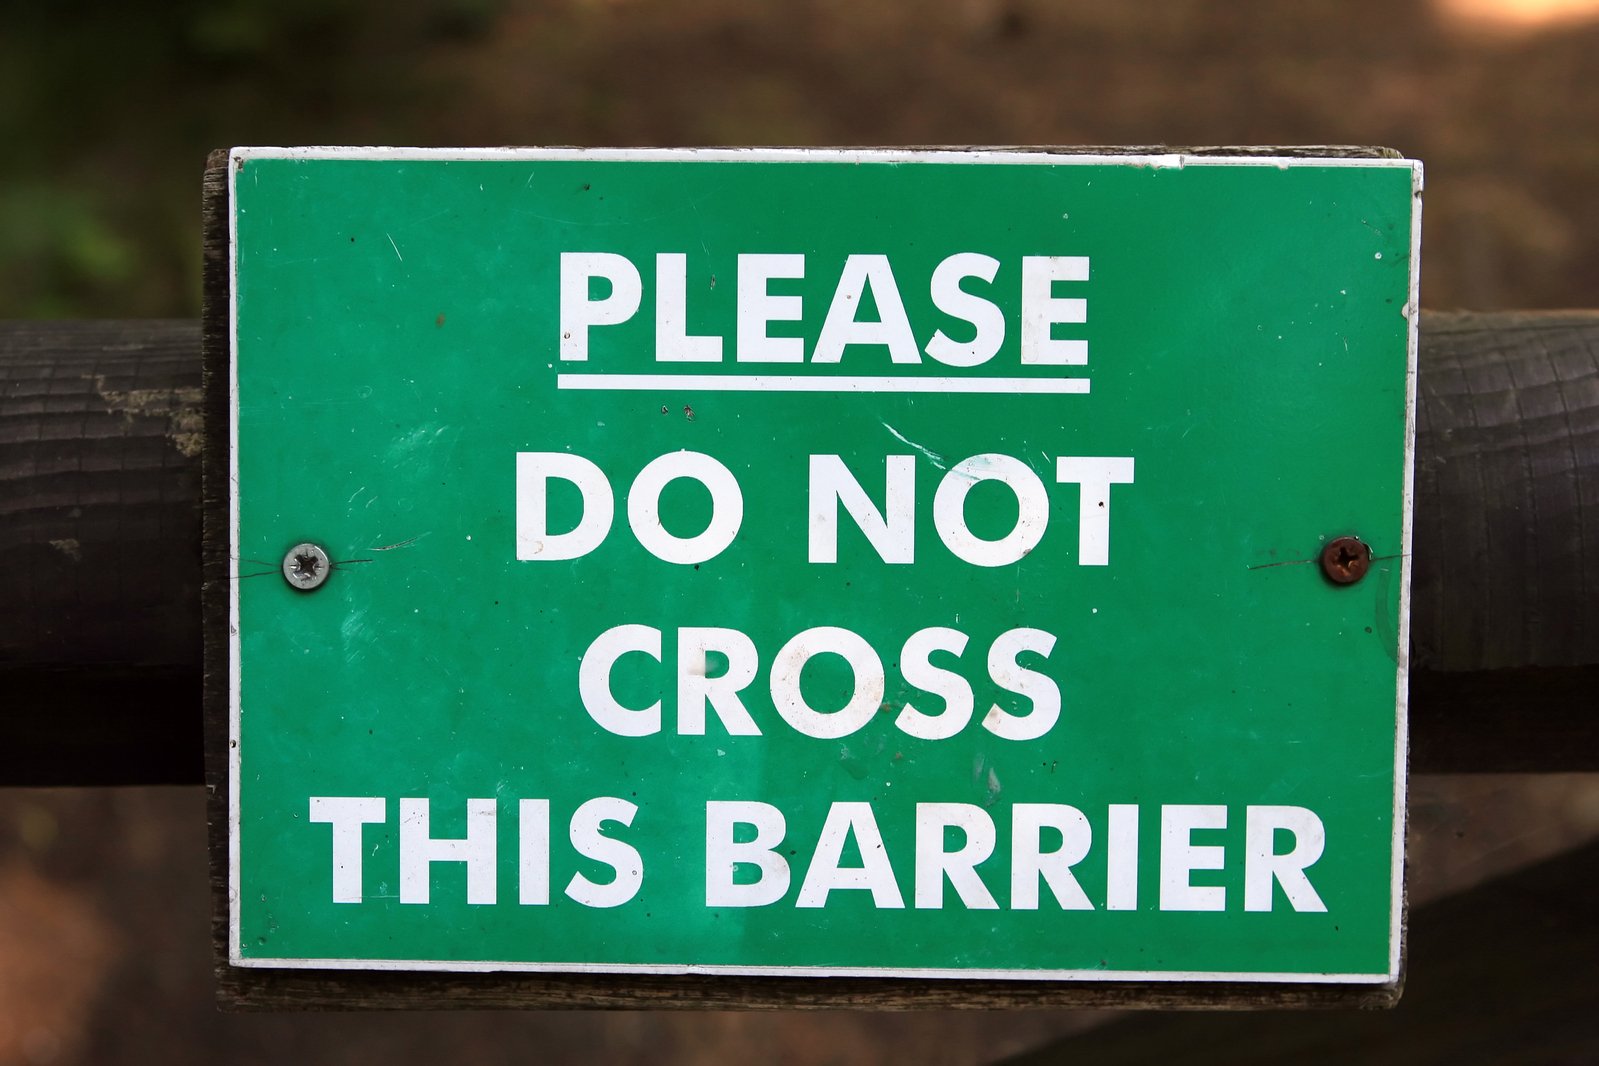 this sign says please do not cross this barrier